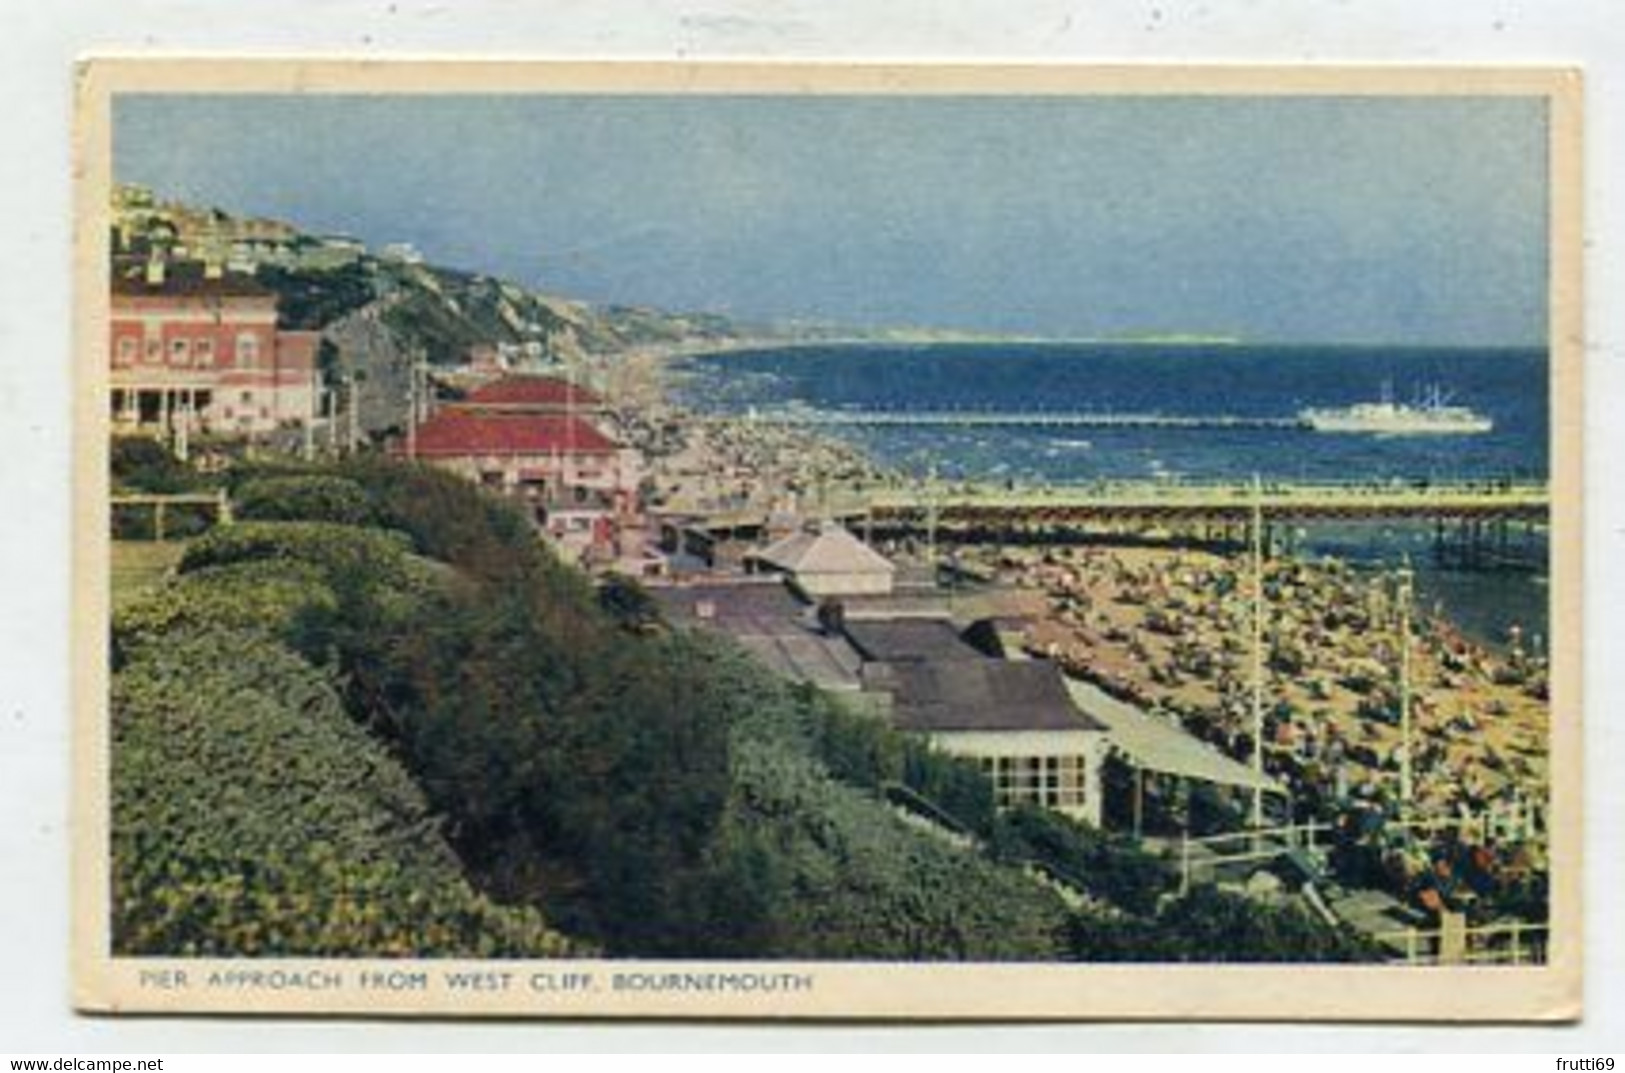 AK 087594 ENGLAND - Bournemouth - Pier Approach From Wesst Cliff - Bournemouth (until 1972)